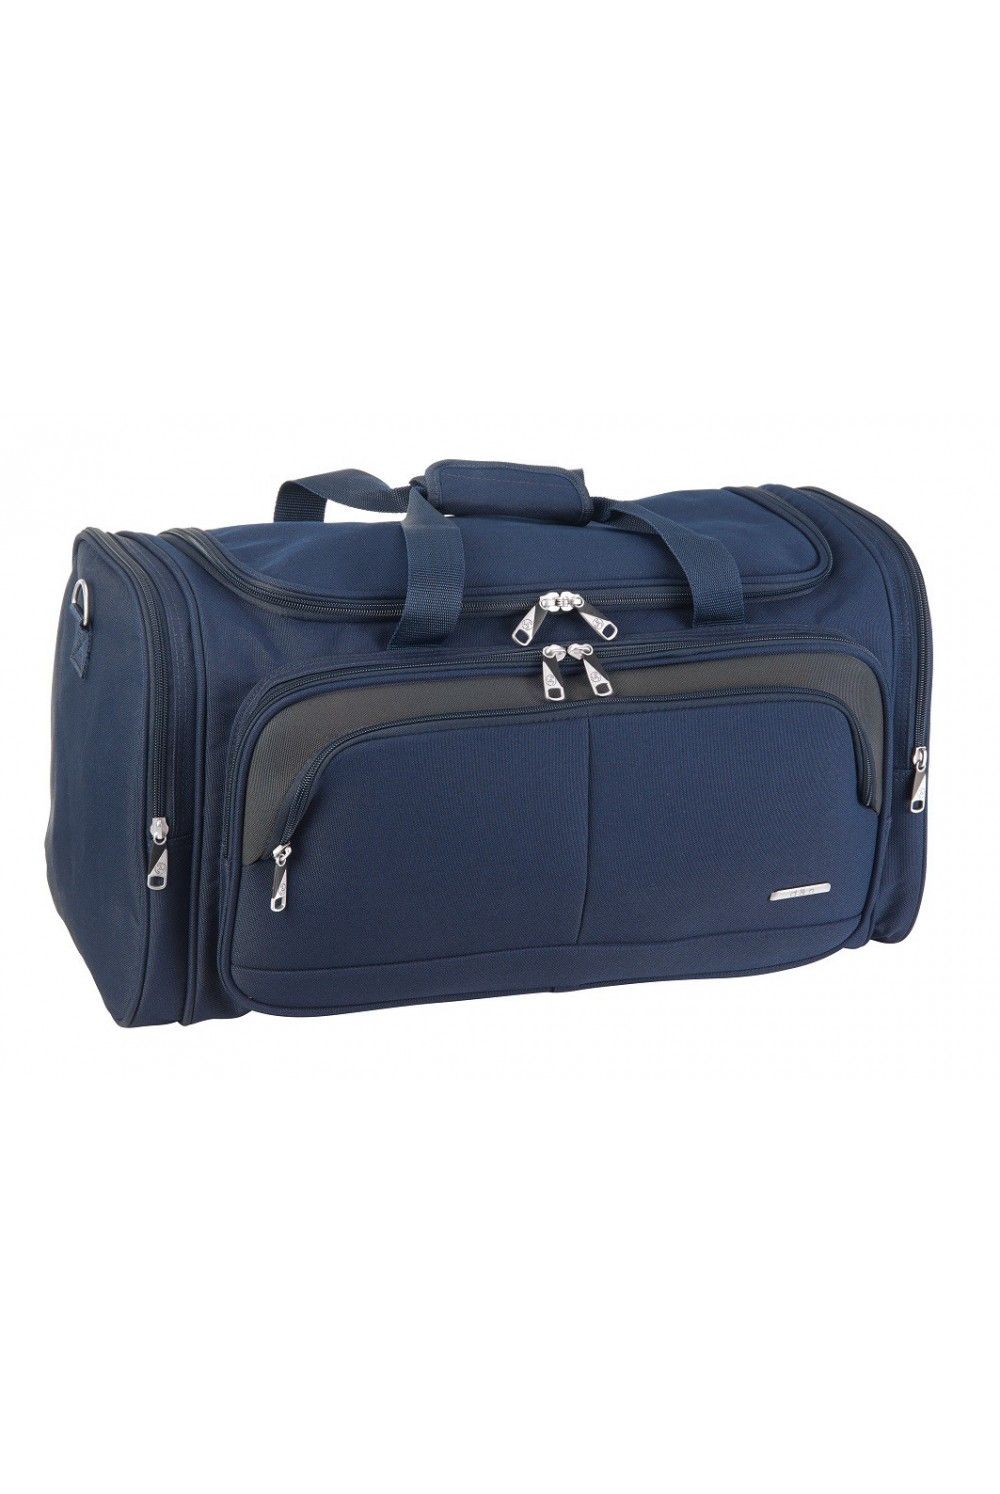 D & N Travel bag without wheels 59 cm 7712